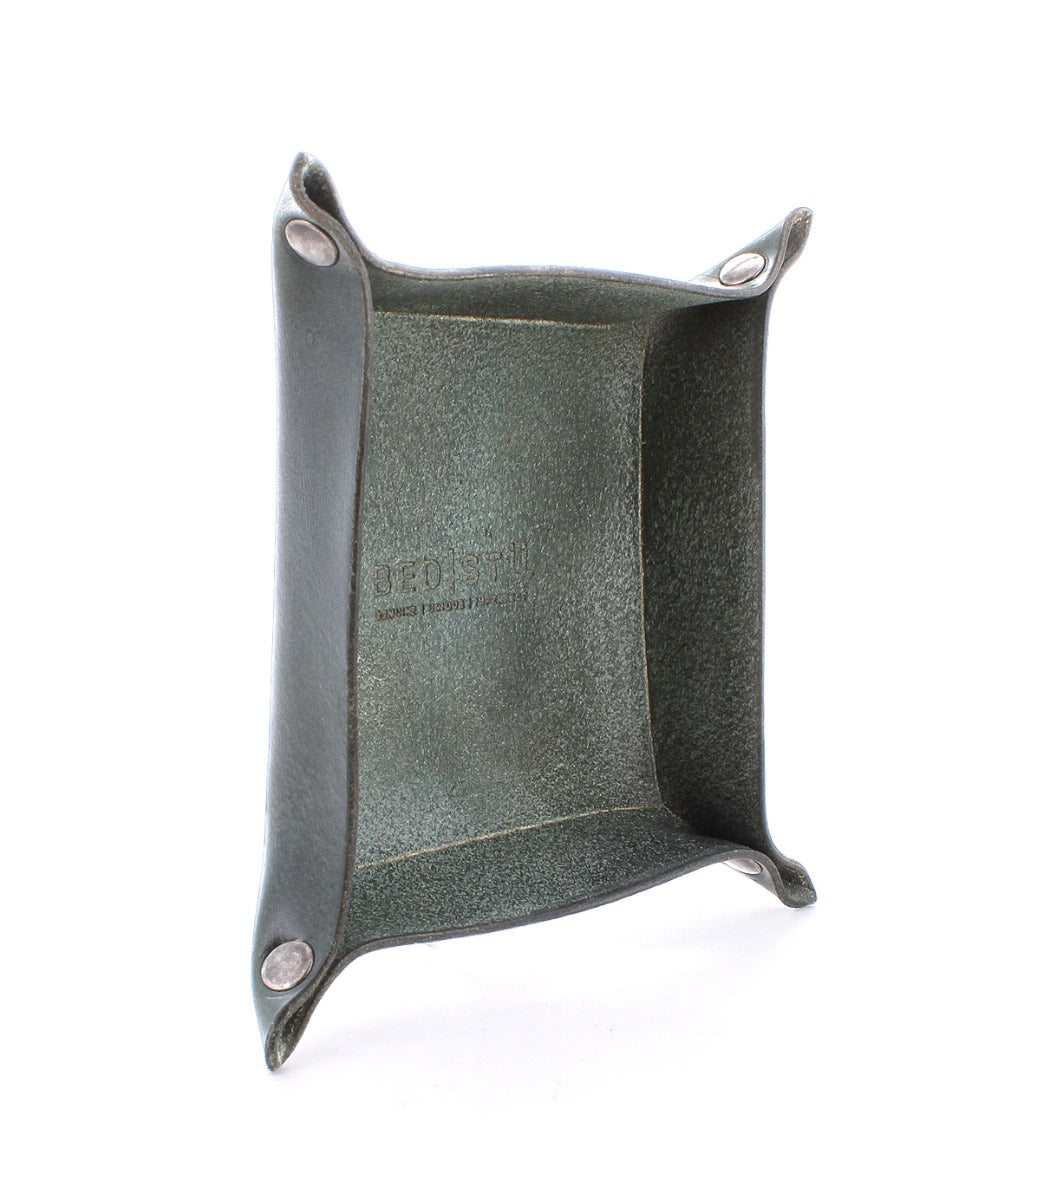 A square, green leather catchall tray with metal snap buttons at the corners for storing loose change and keys. The Expanse Catchall Tray by Bed Stu is embossed inside.